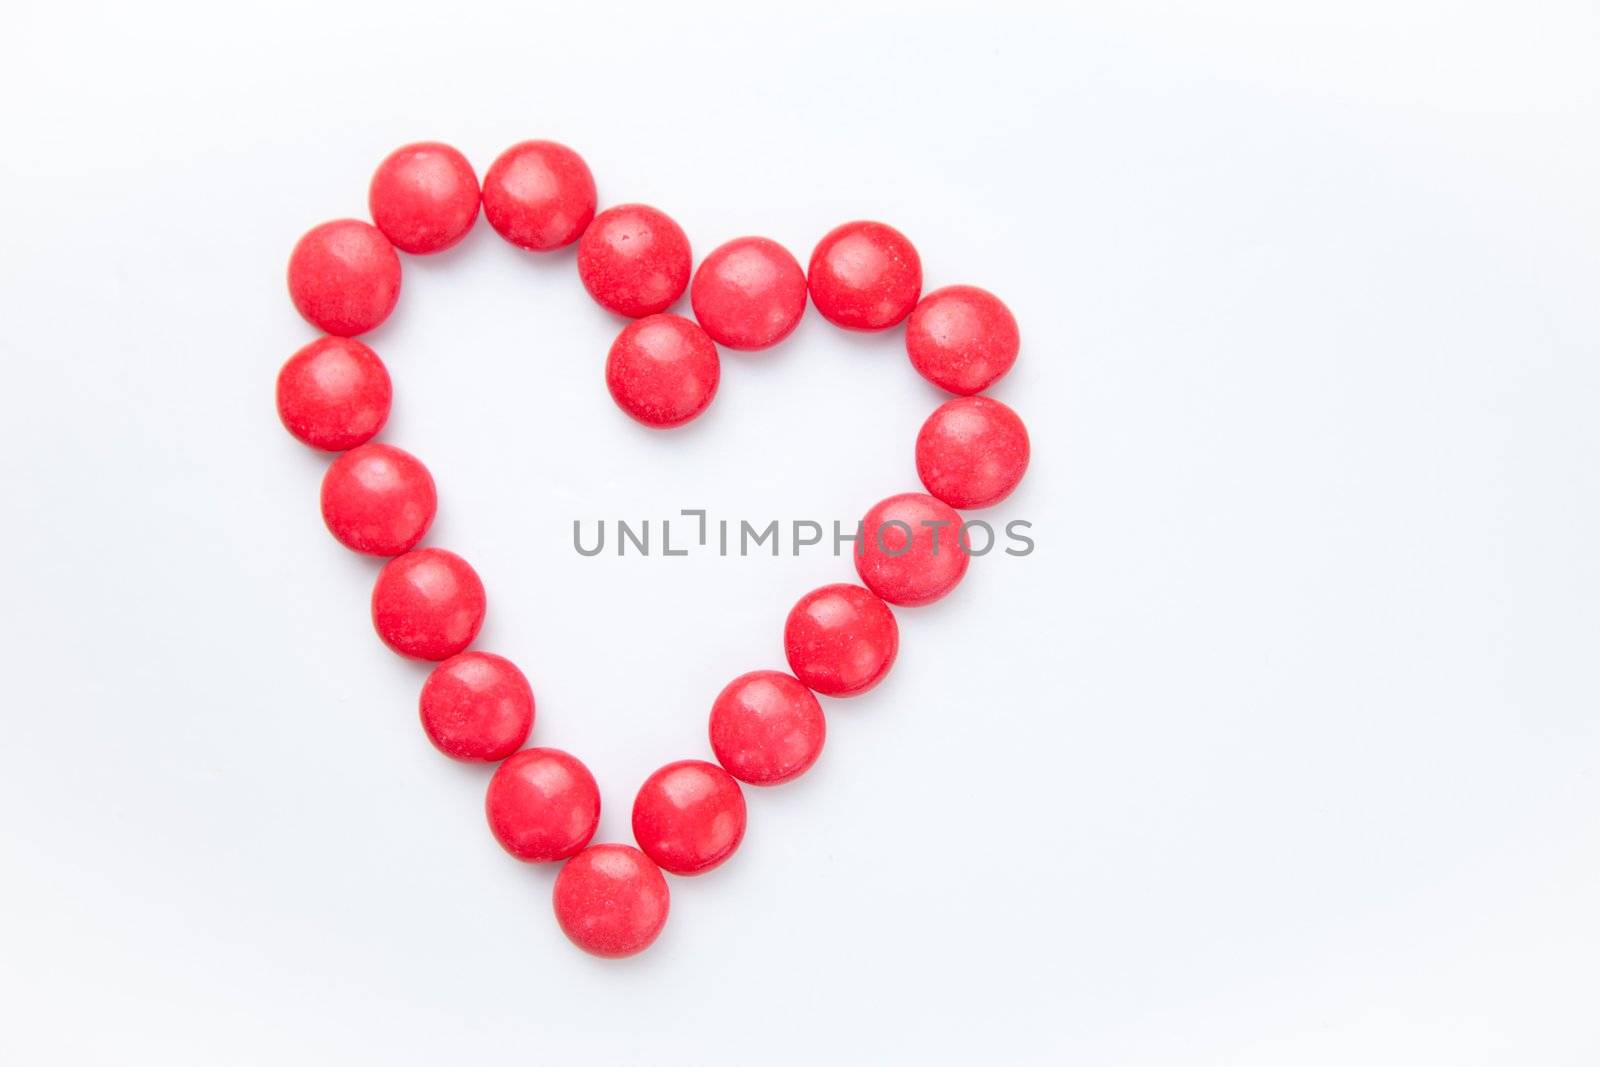 Heart of candies against a white background